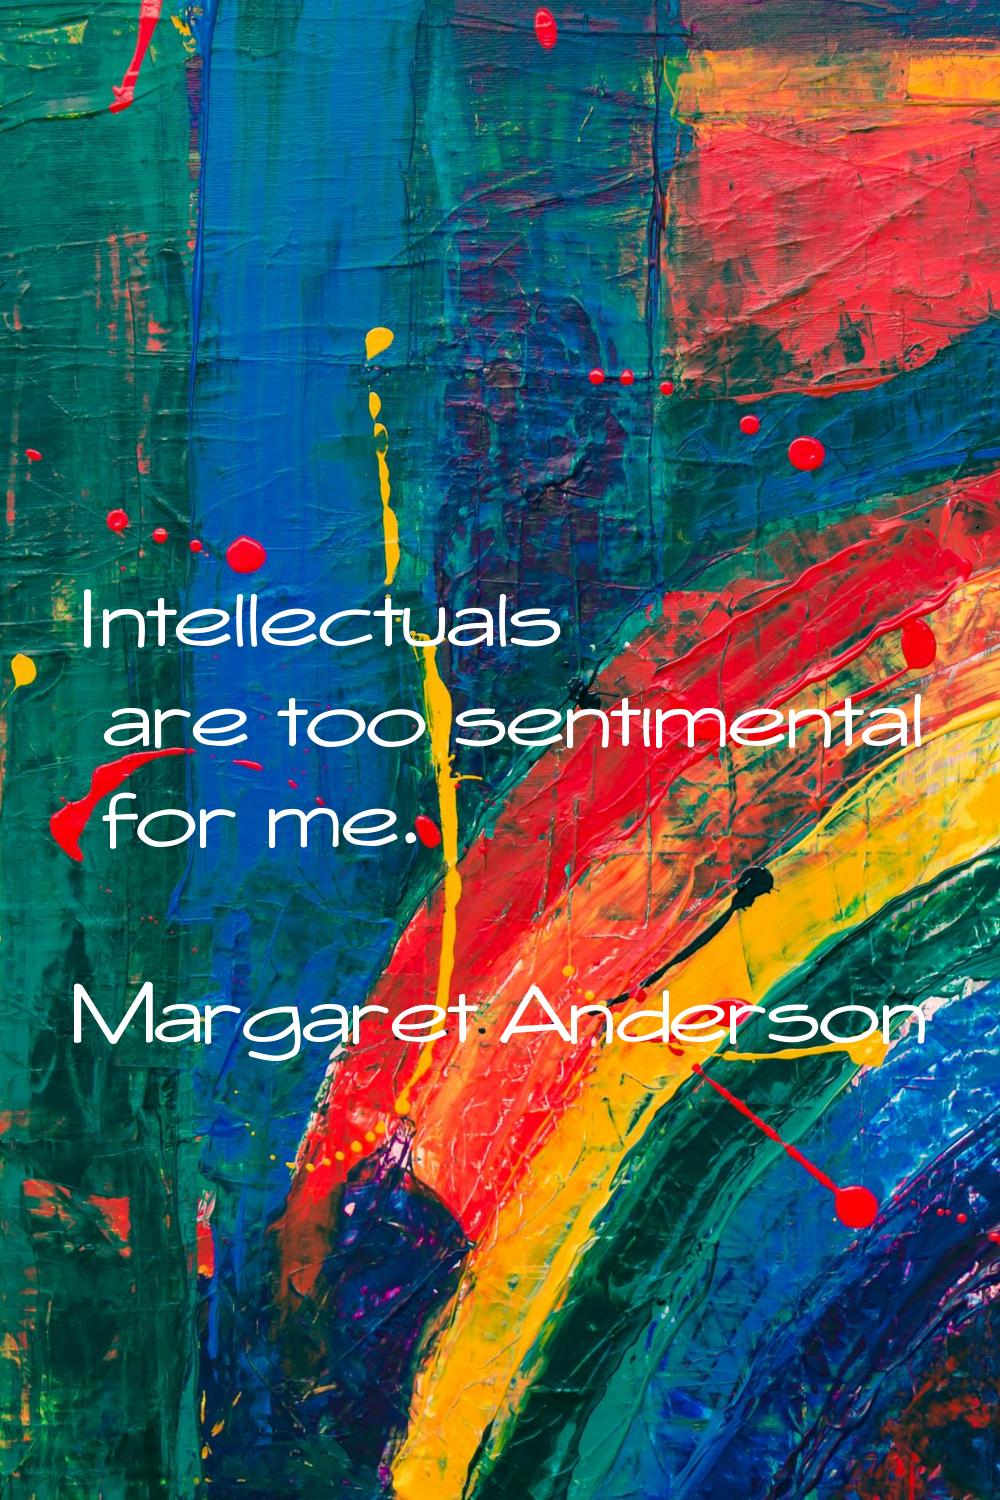 Intellectuals are too sentimental for me.